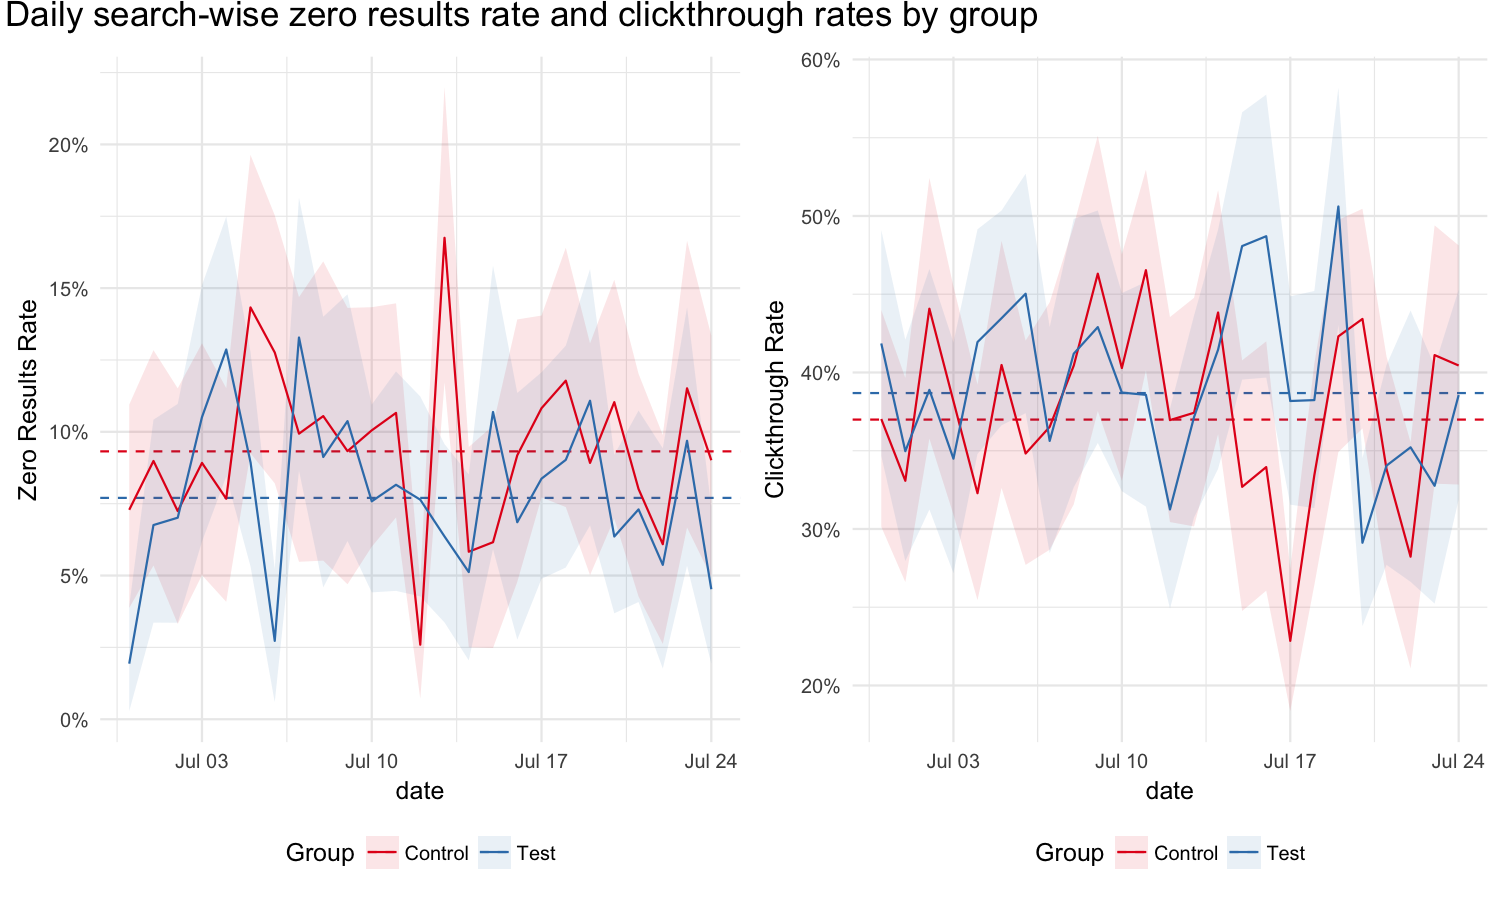 **Figure 3**: Daily search-wise zero results rate and clickthrough rates of experimental groups. Dashed lines mark the overall zero results rate and clickthrough rate.